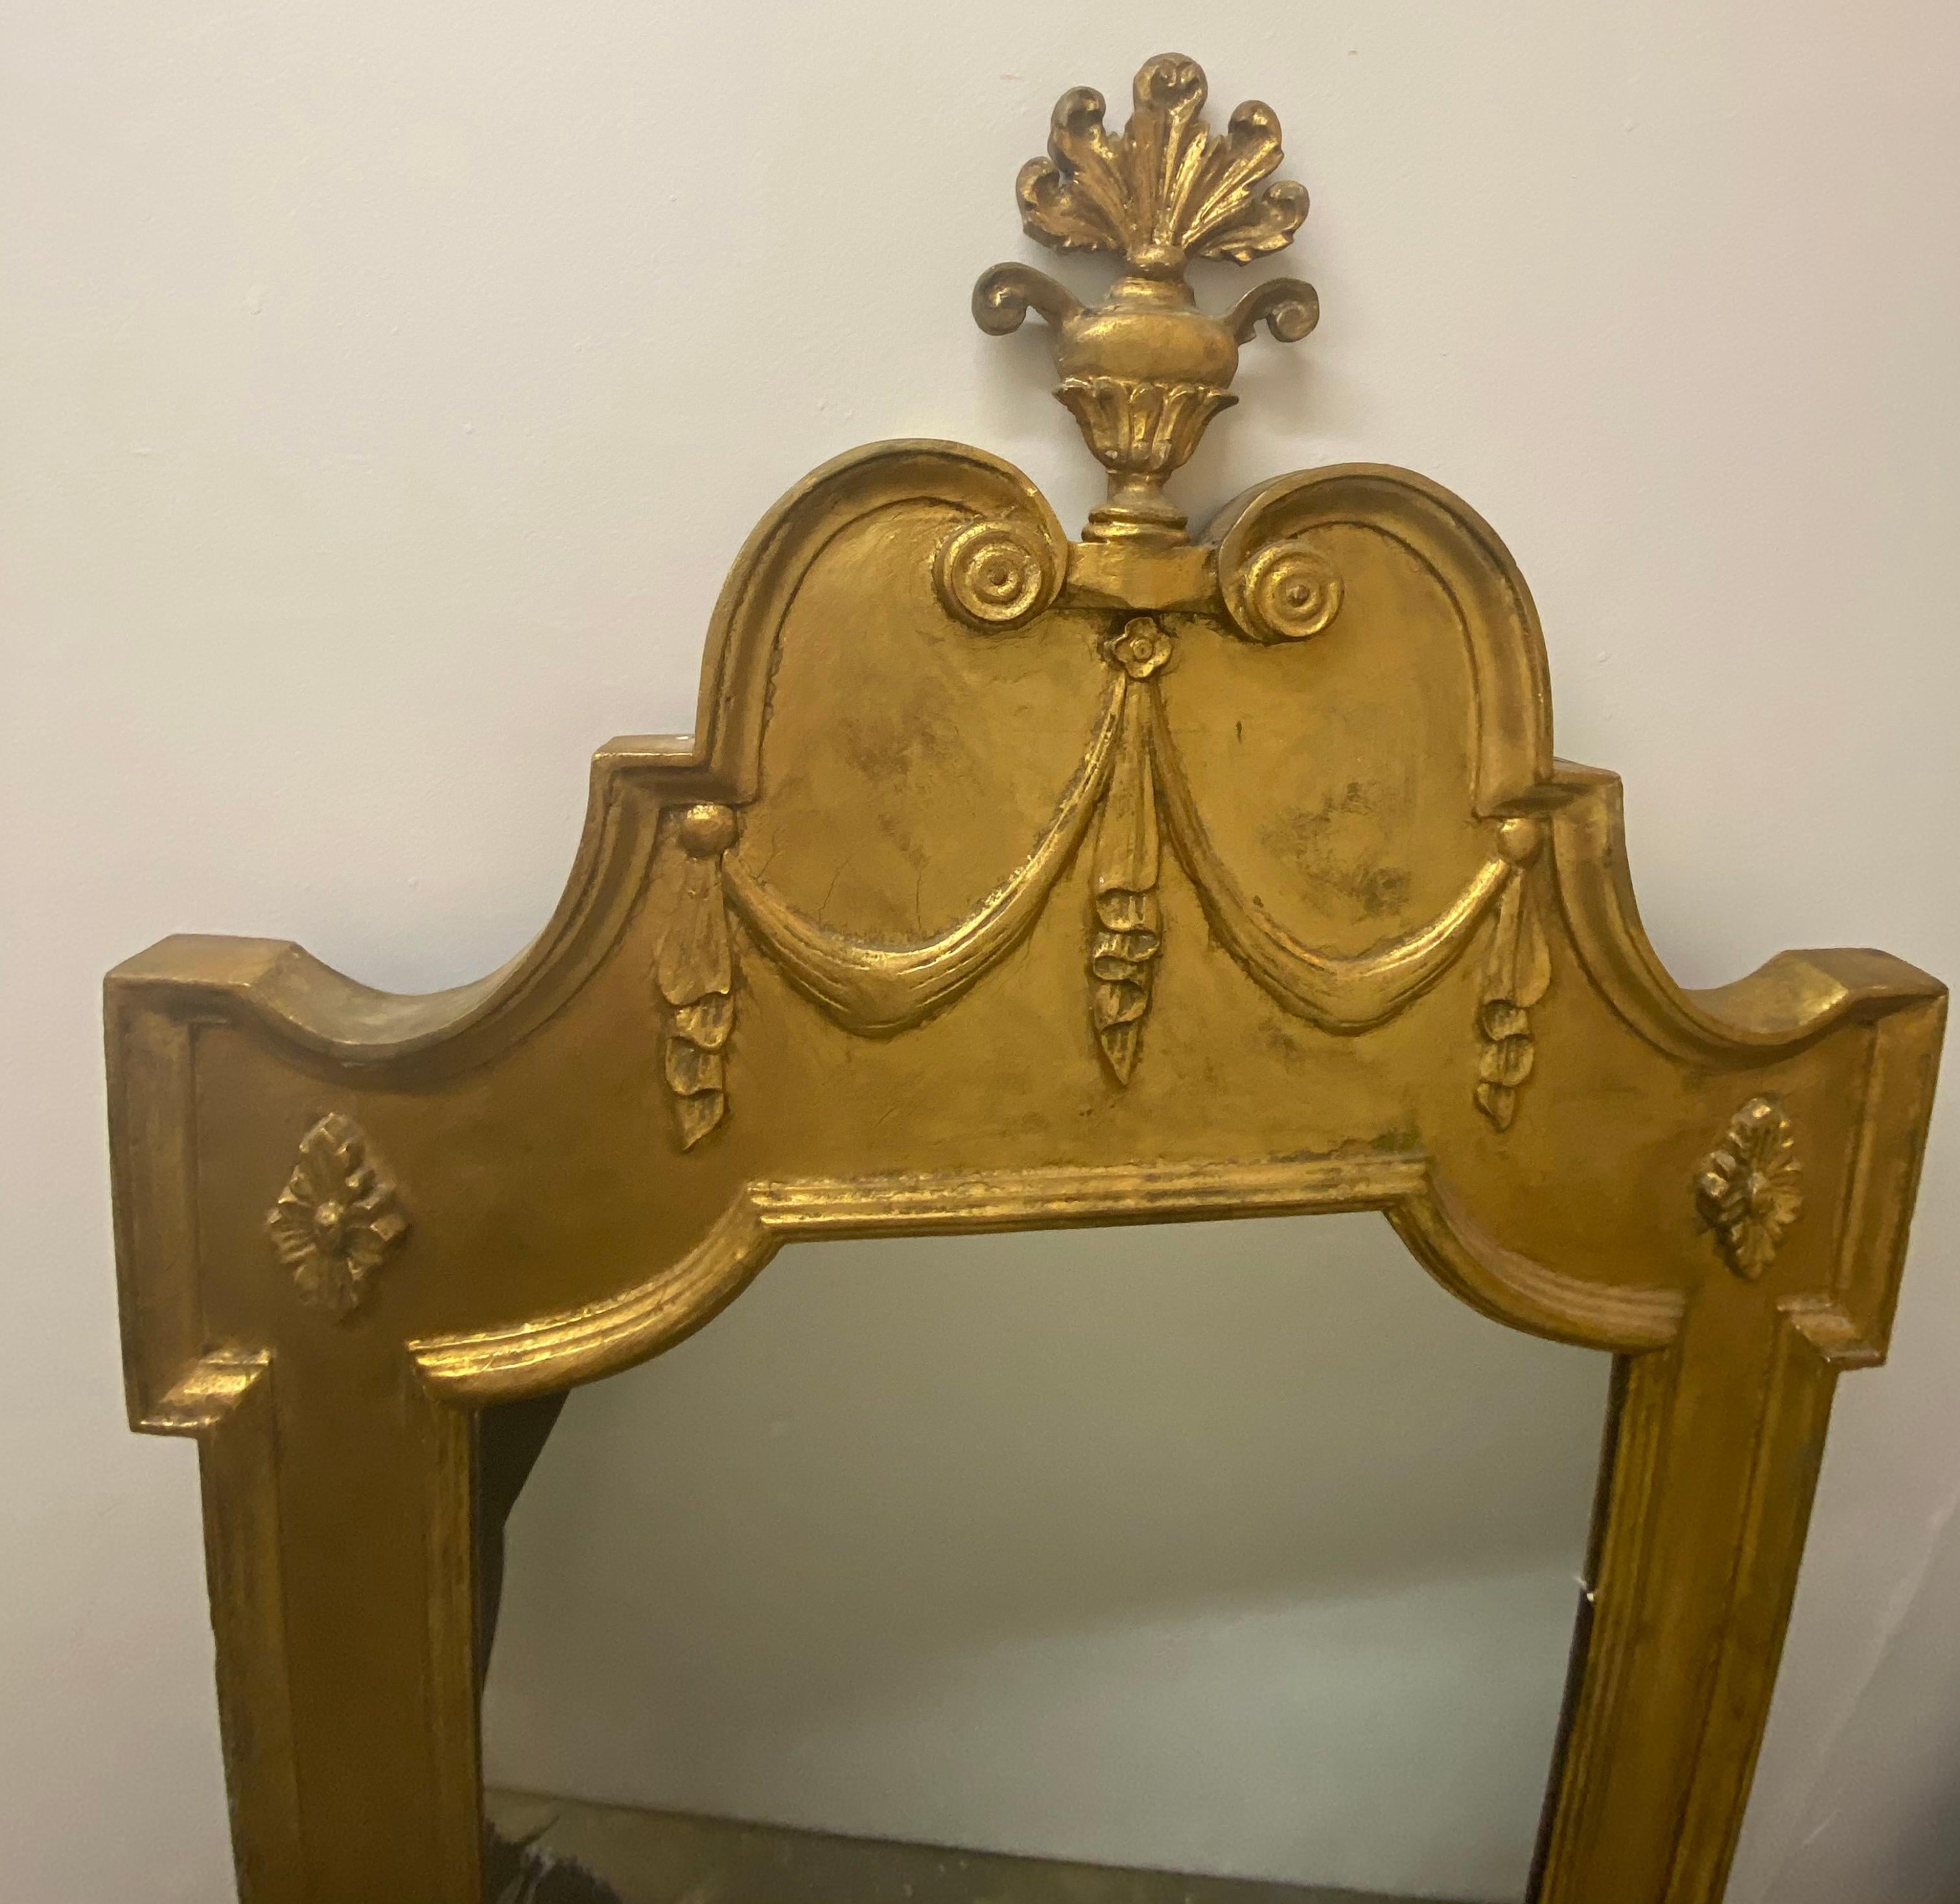 Neoclassical Revival Continental Neoclassical Giltwood Mirror For Sale